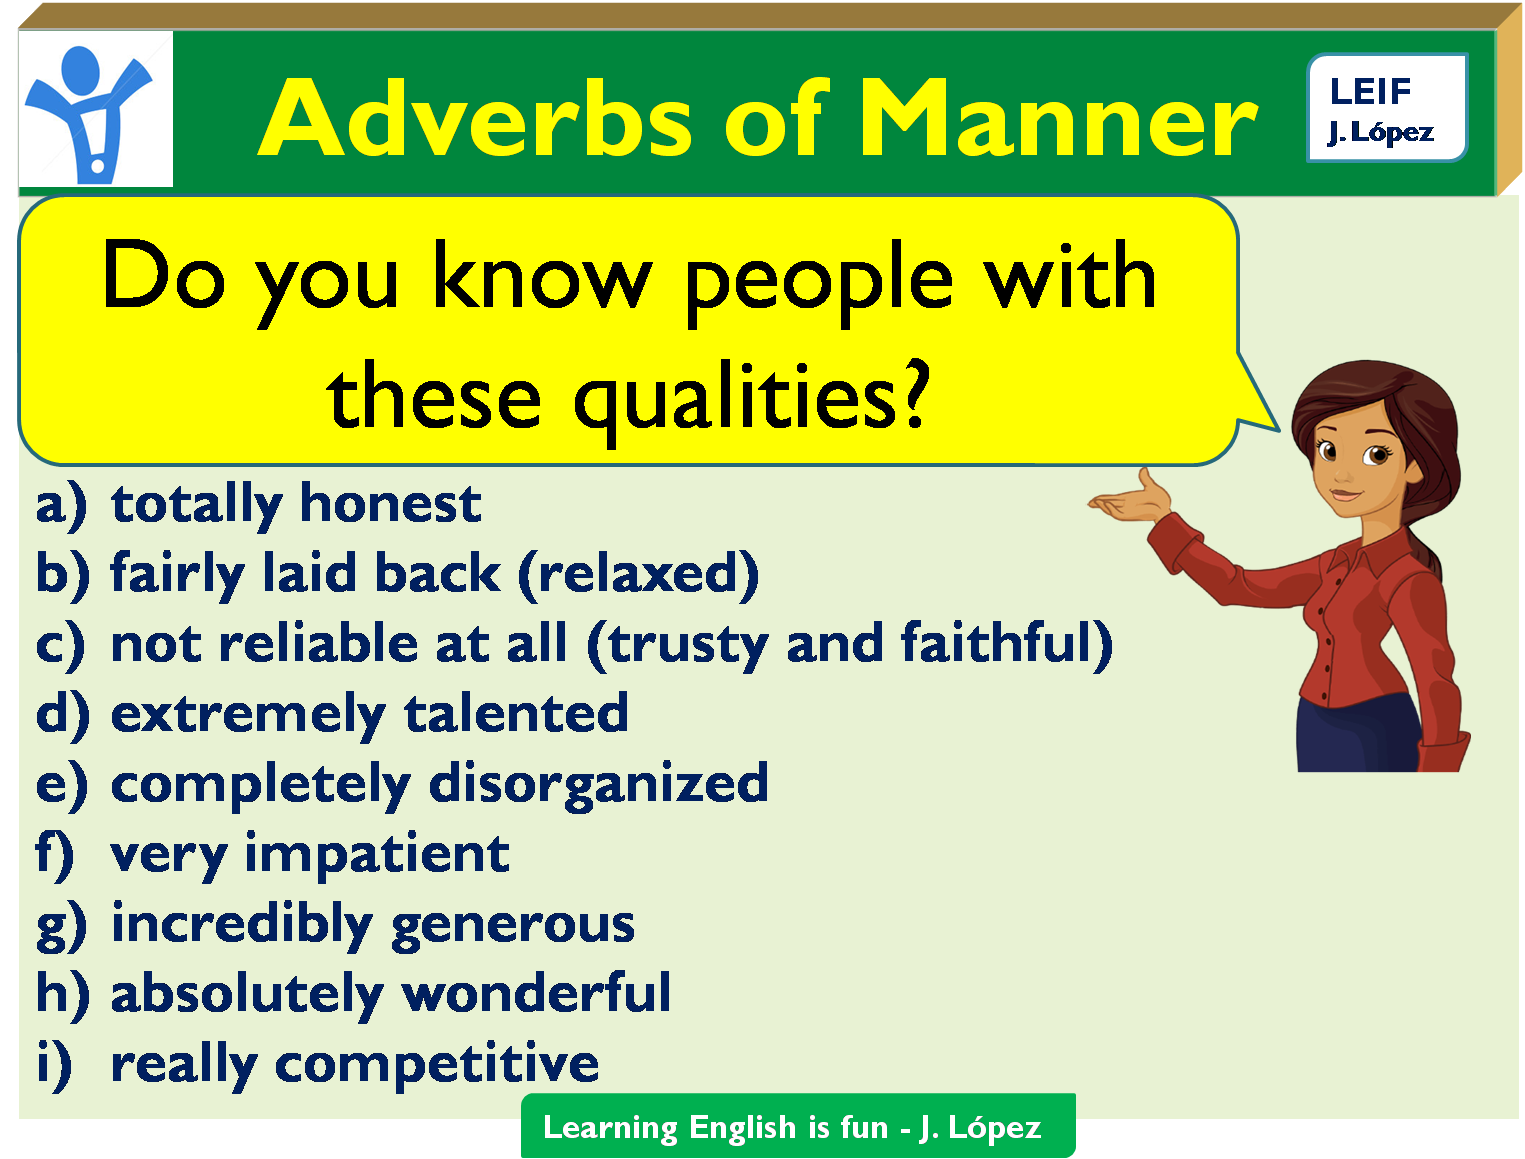 Quickly adverb. Adverbs of manner. Adverbs of manner in English. Образование adverbs of manners. Adverbs of manner правило.